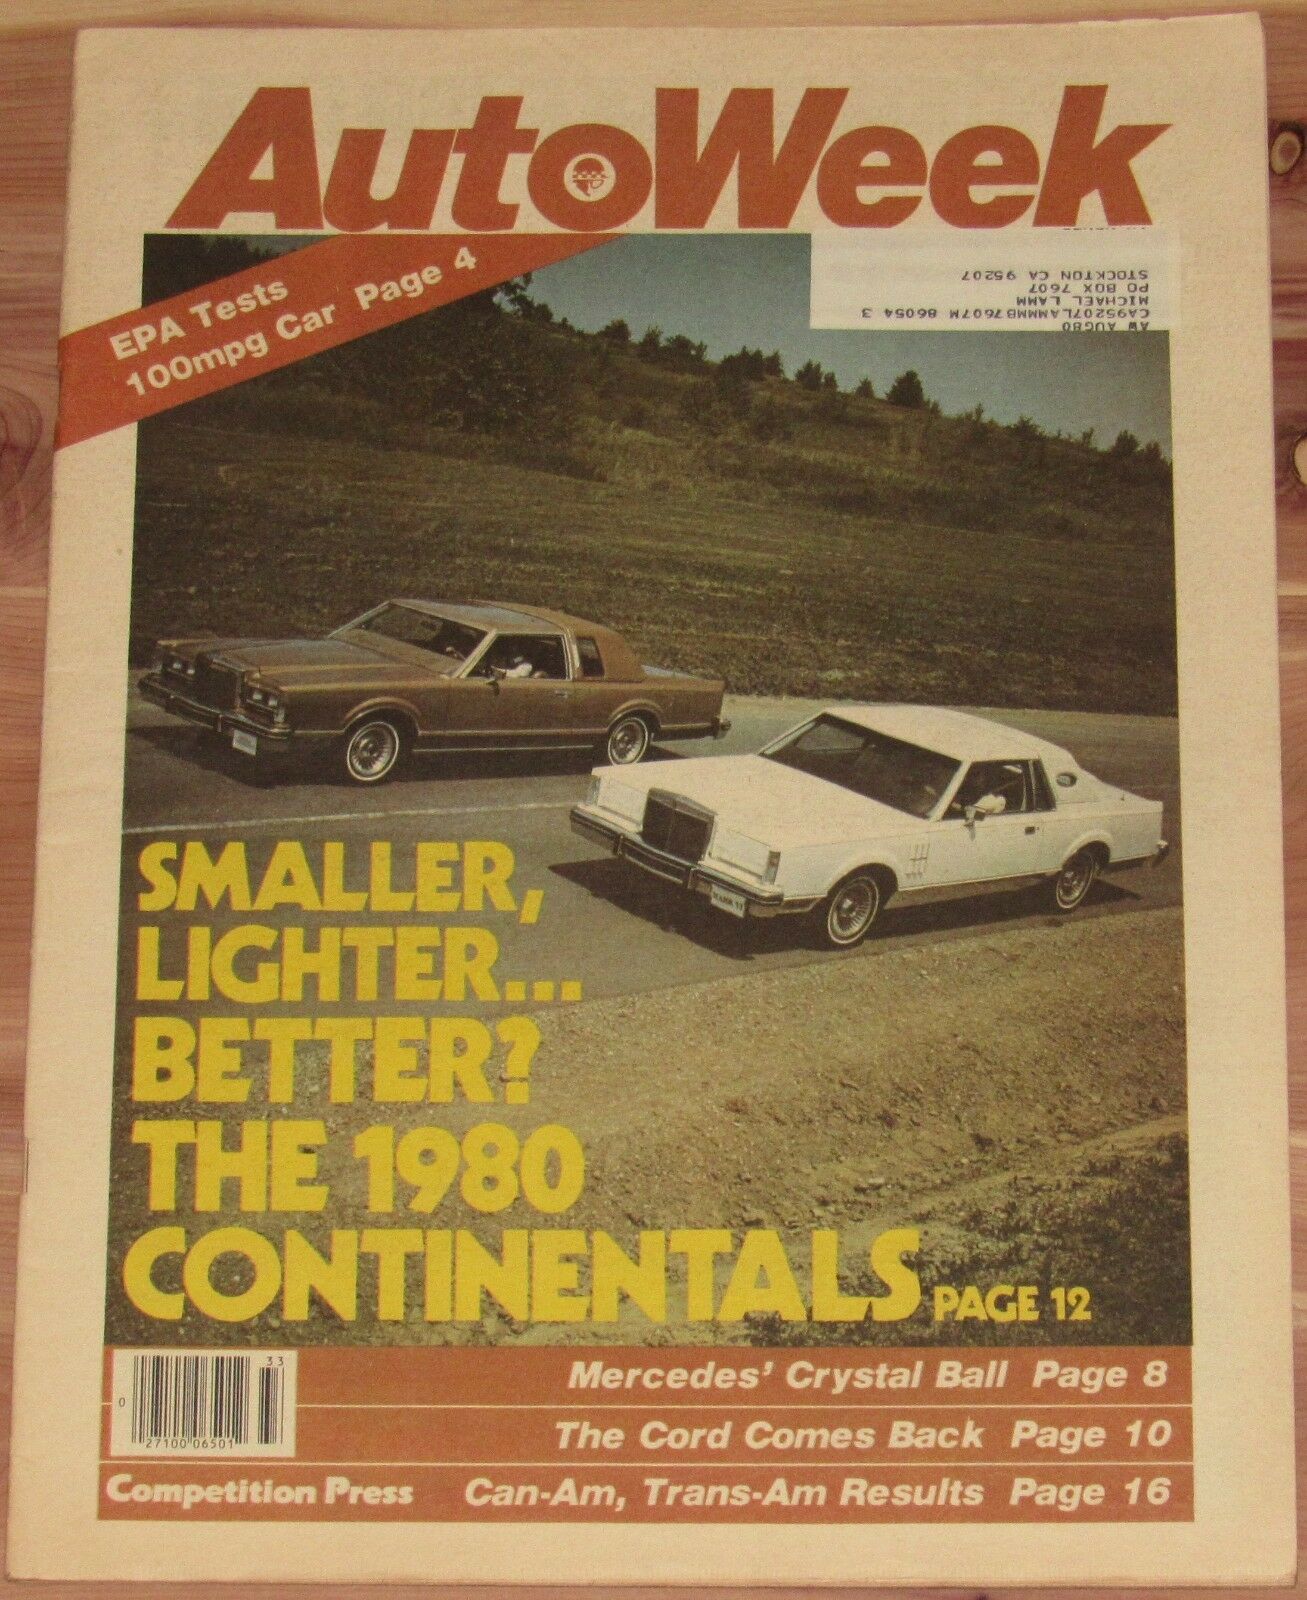 August 13 1979 Autoweek Magazine Lincoln Continental, Can-am, Trans-am Results